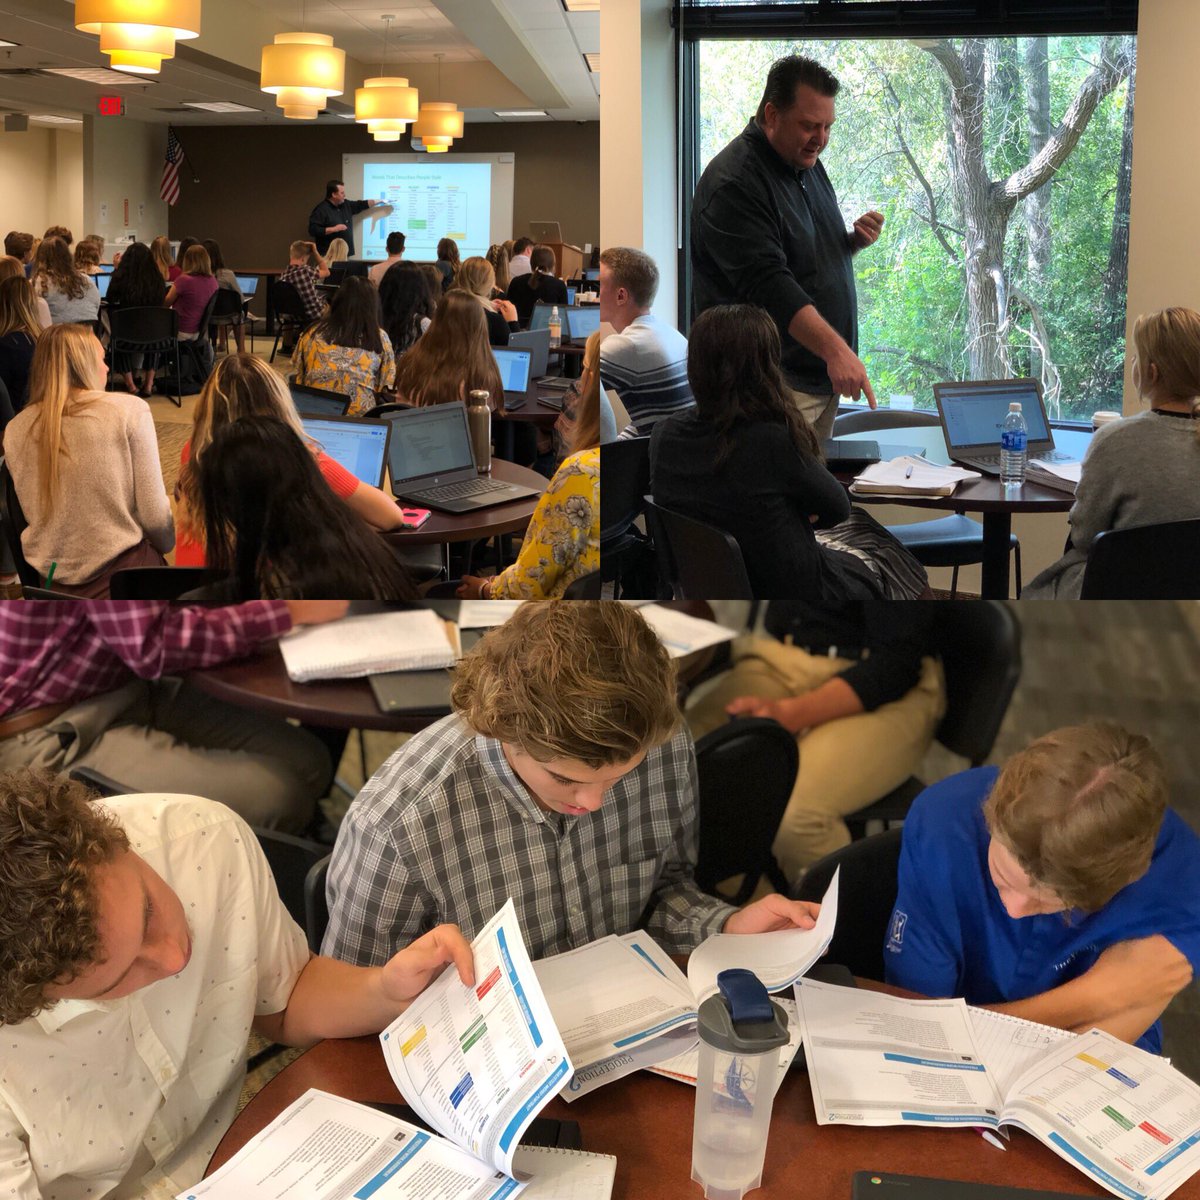 Discovering how behavioral styles impact the work environment; a pivotal experience to set the stage for #projectbasedlearning. #mncapsbiz #mncapshealth  #maximumpotential @Bmaxpo